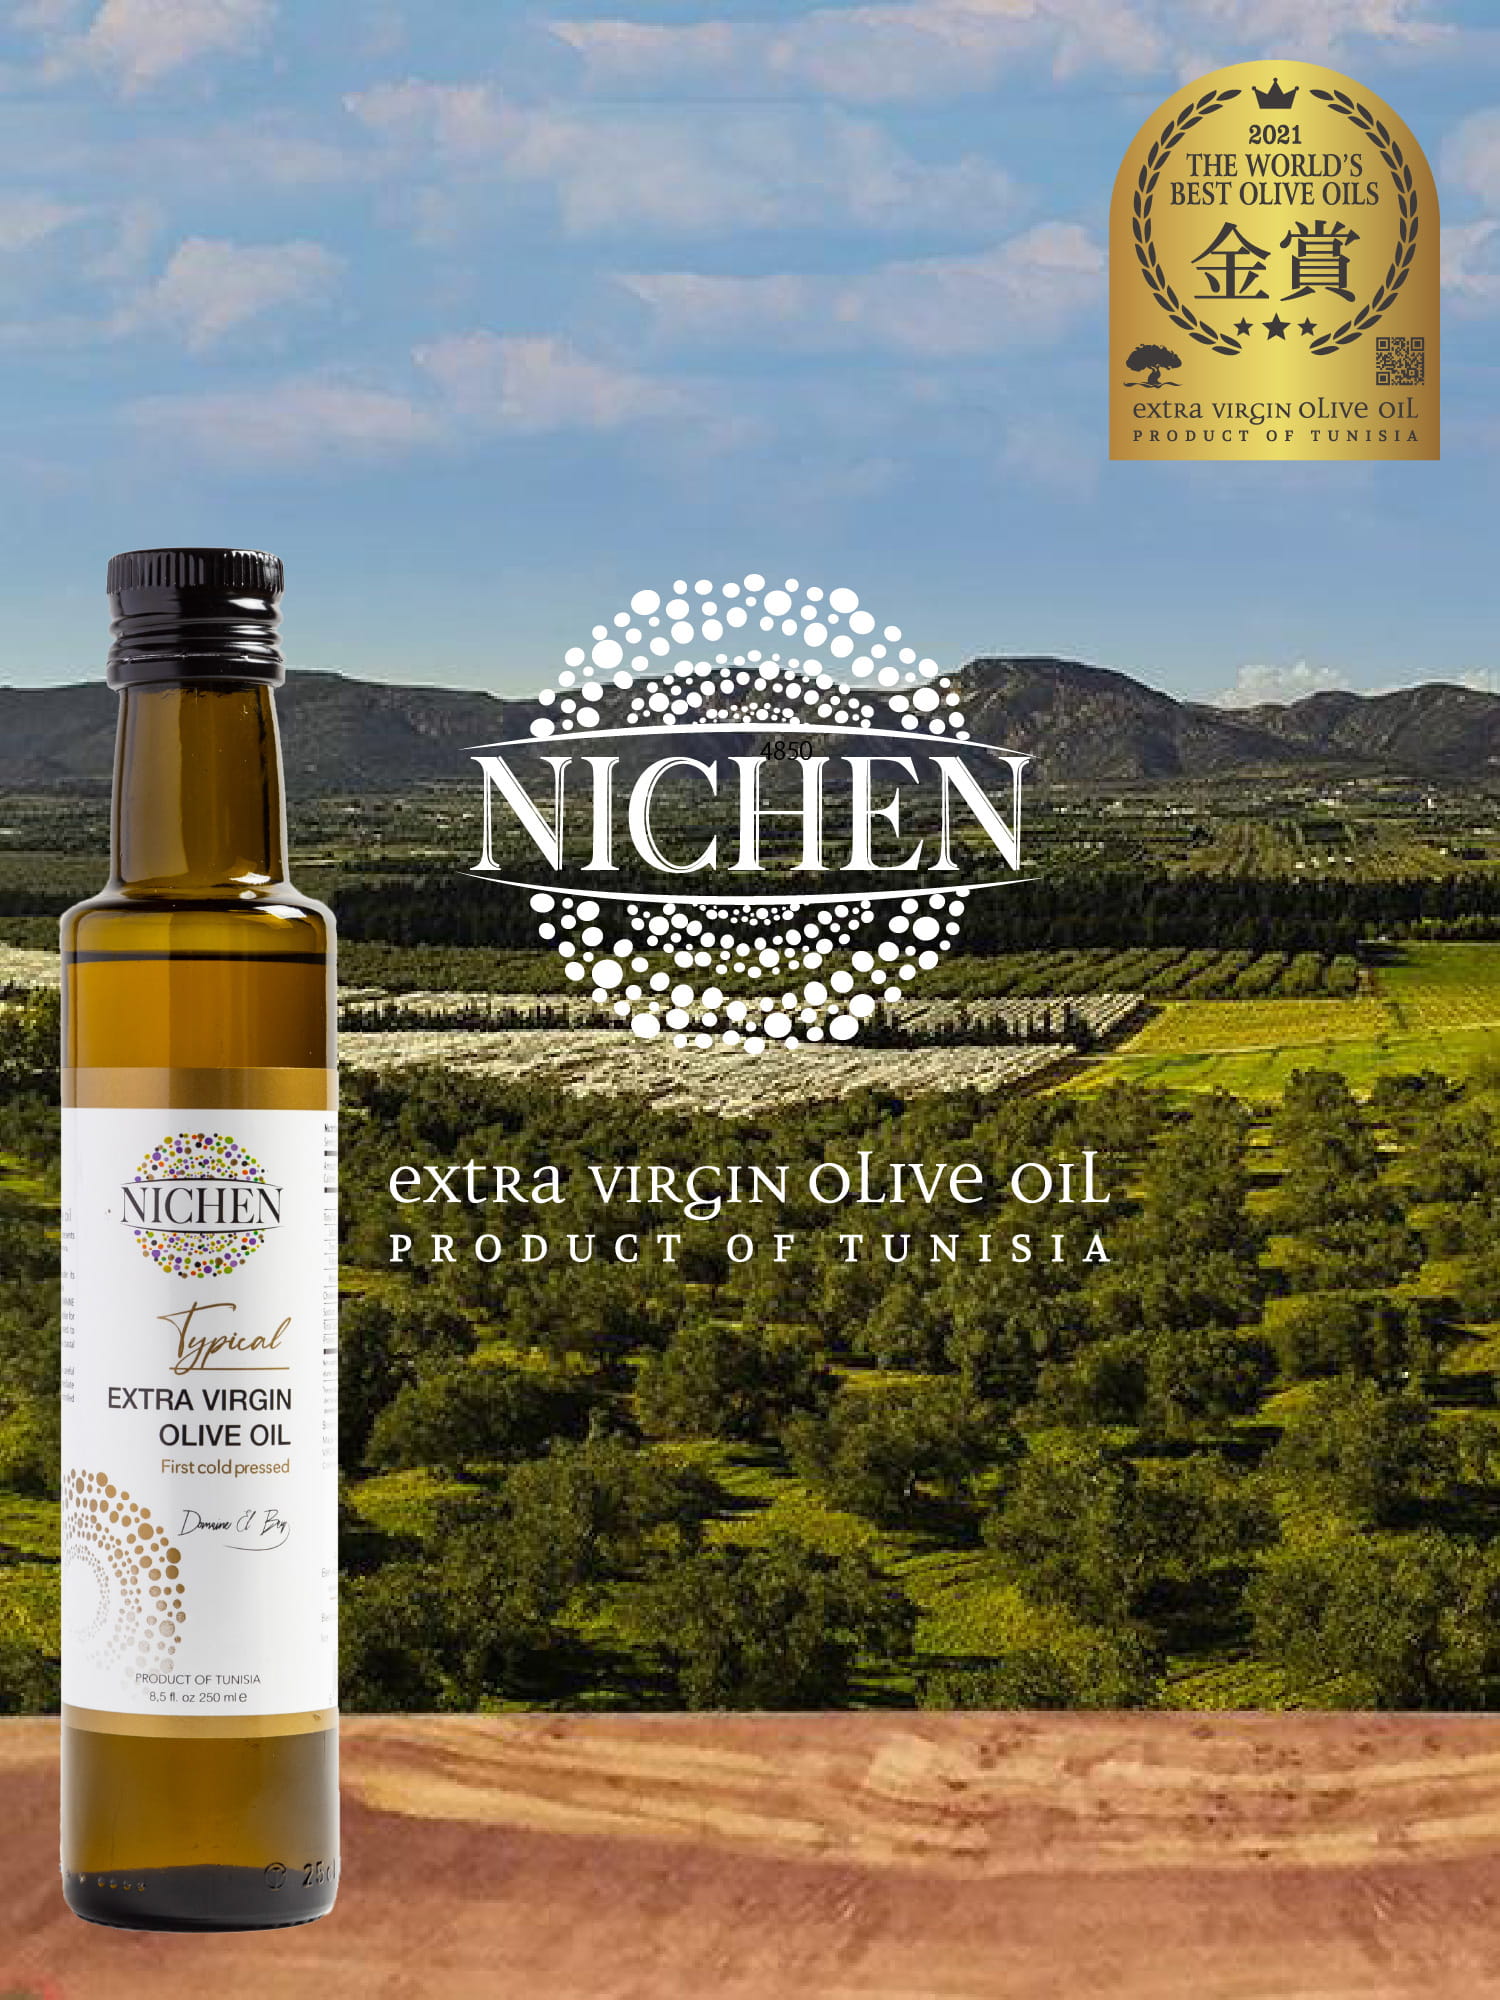 EXTRA VIRGIN OLIVE OIL PRODUCT OF TUNISIA